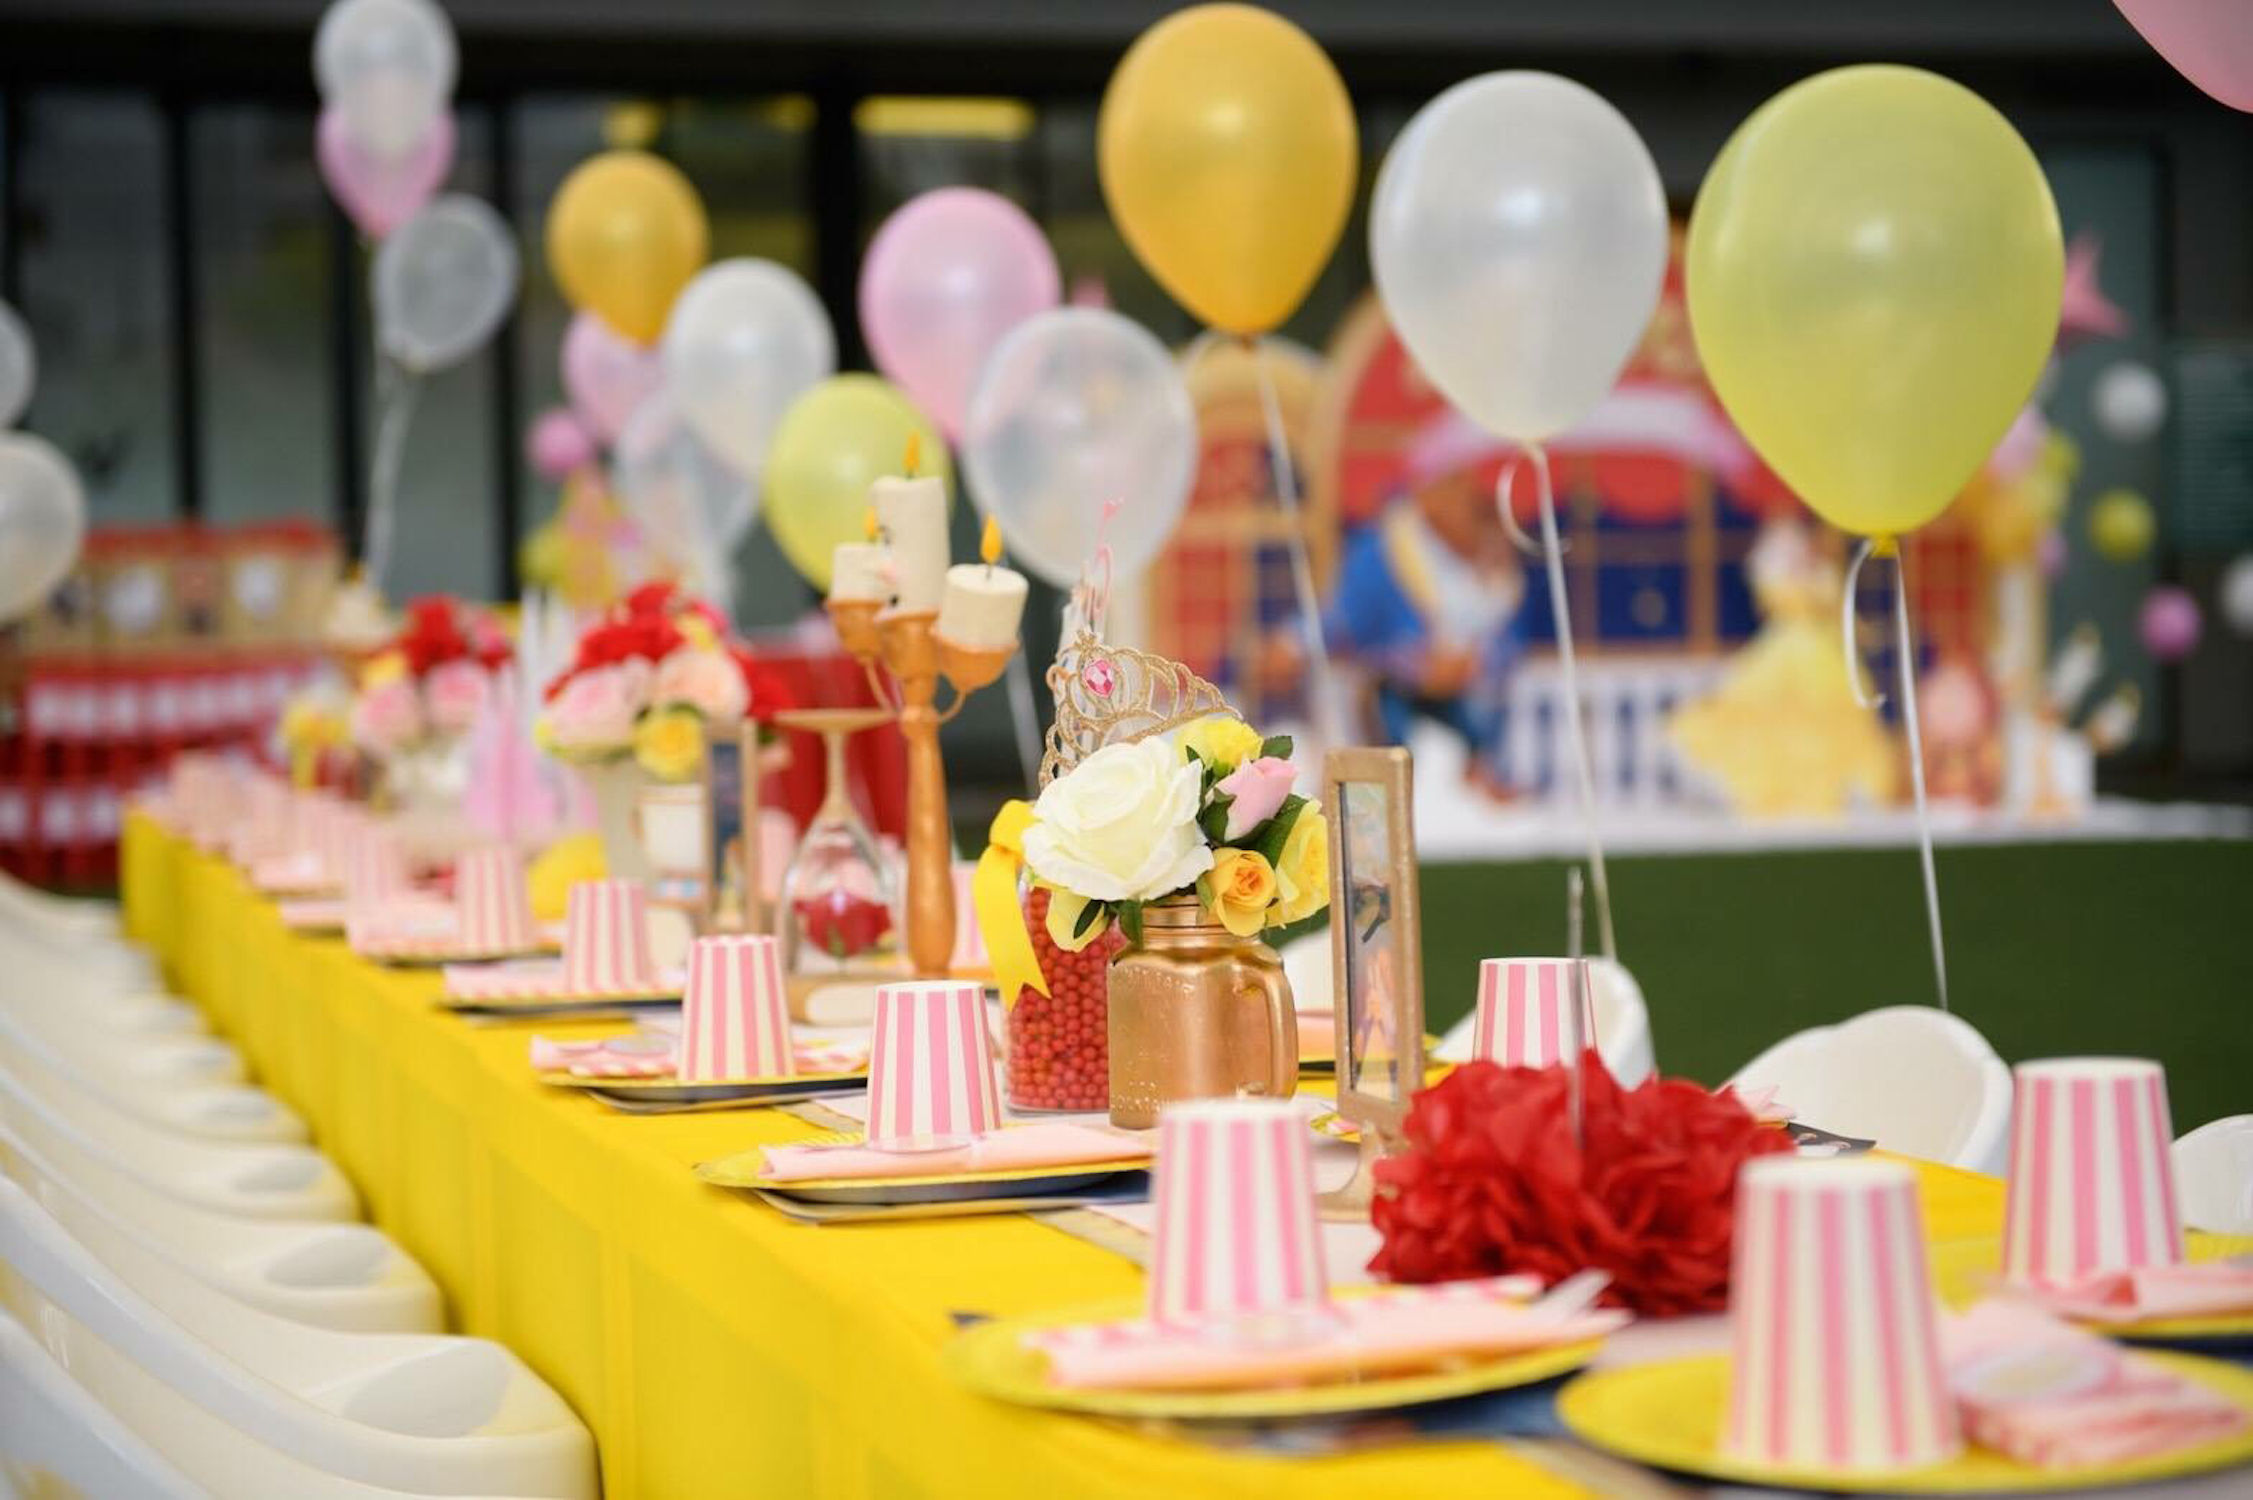 5 of Bangkok’s Best Kids’ Birthday Party Spots & Services